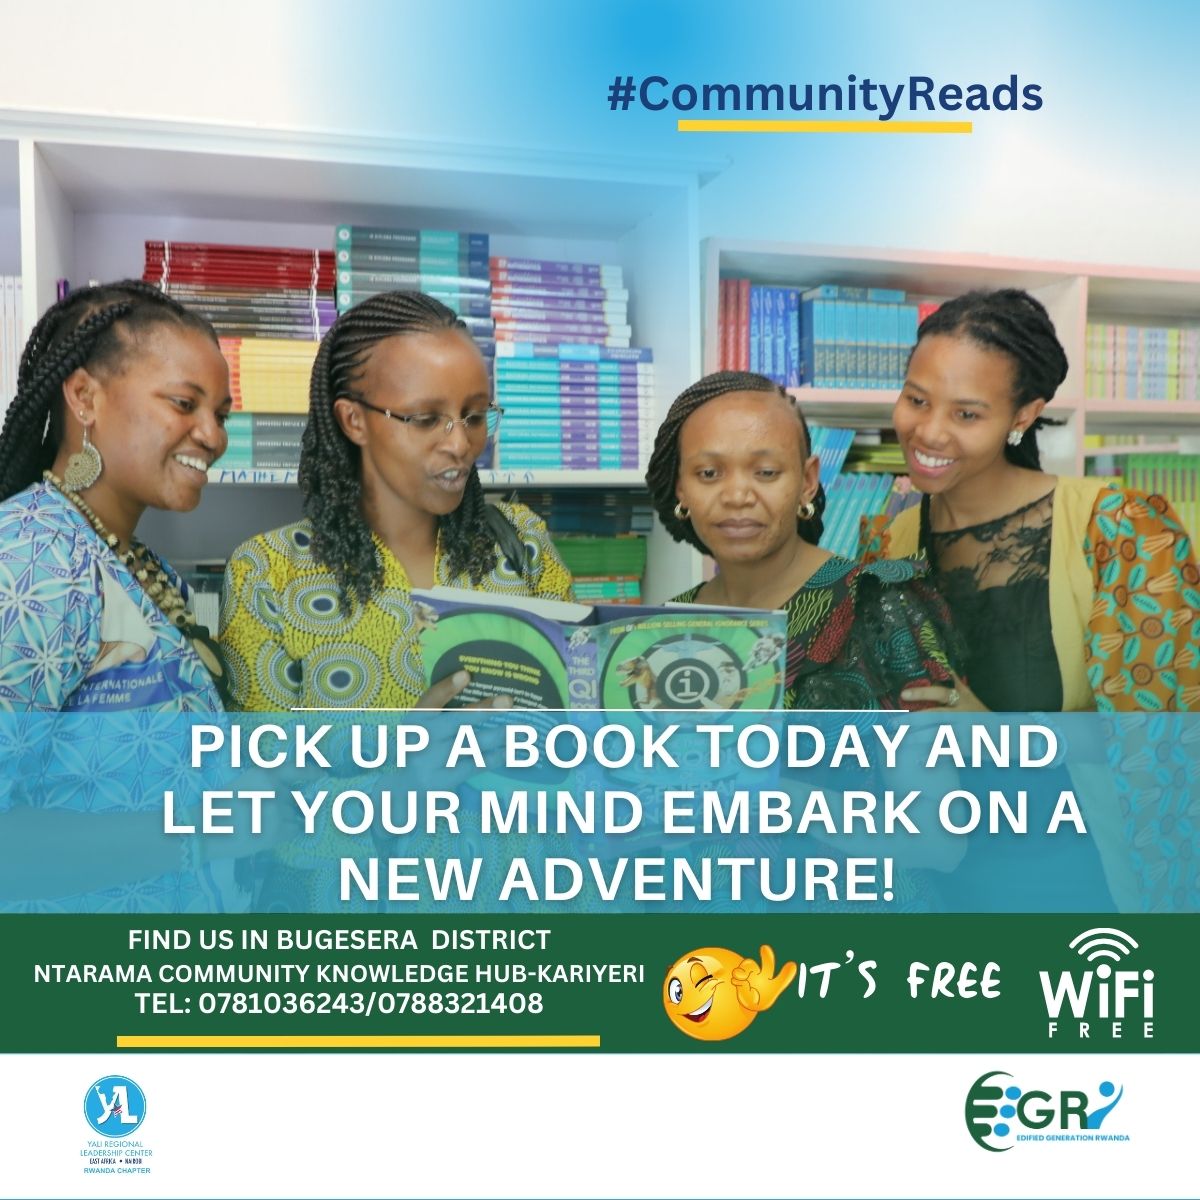 Reading is not just a pastime; it's a journey to explore new worlds, learn new things, and broaden your perspectives. Pick up a book today and let your mind embark on a new adventure! #CommunityReads IT'S FREE!! Come and bring your kids.